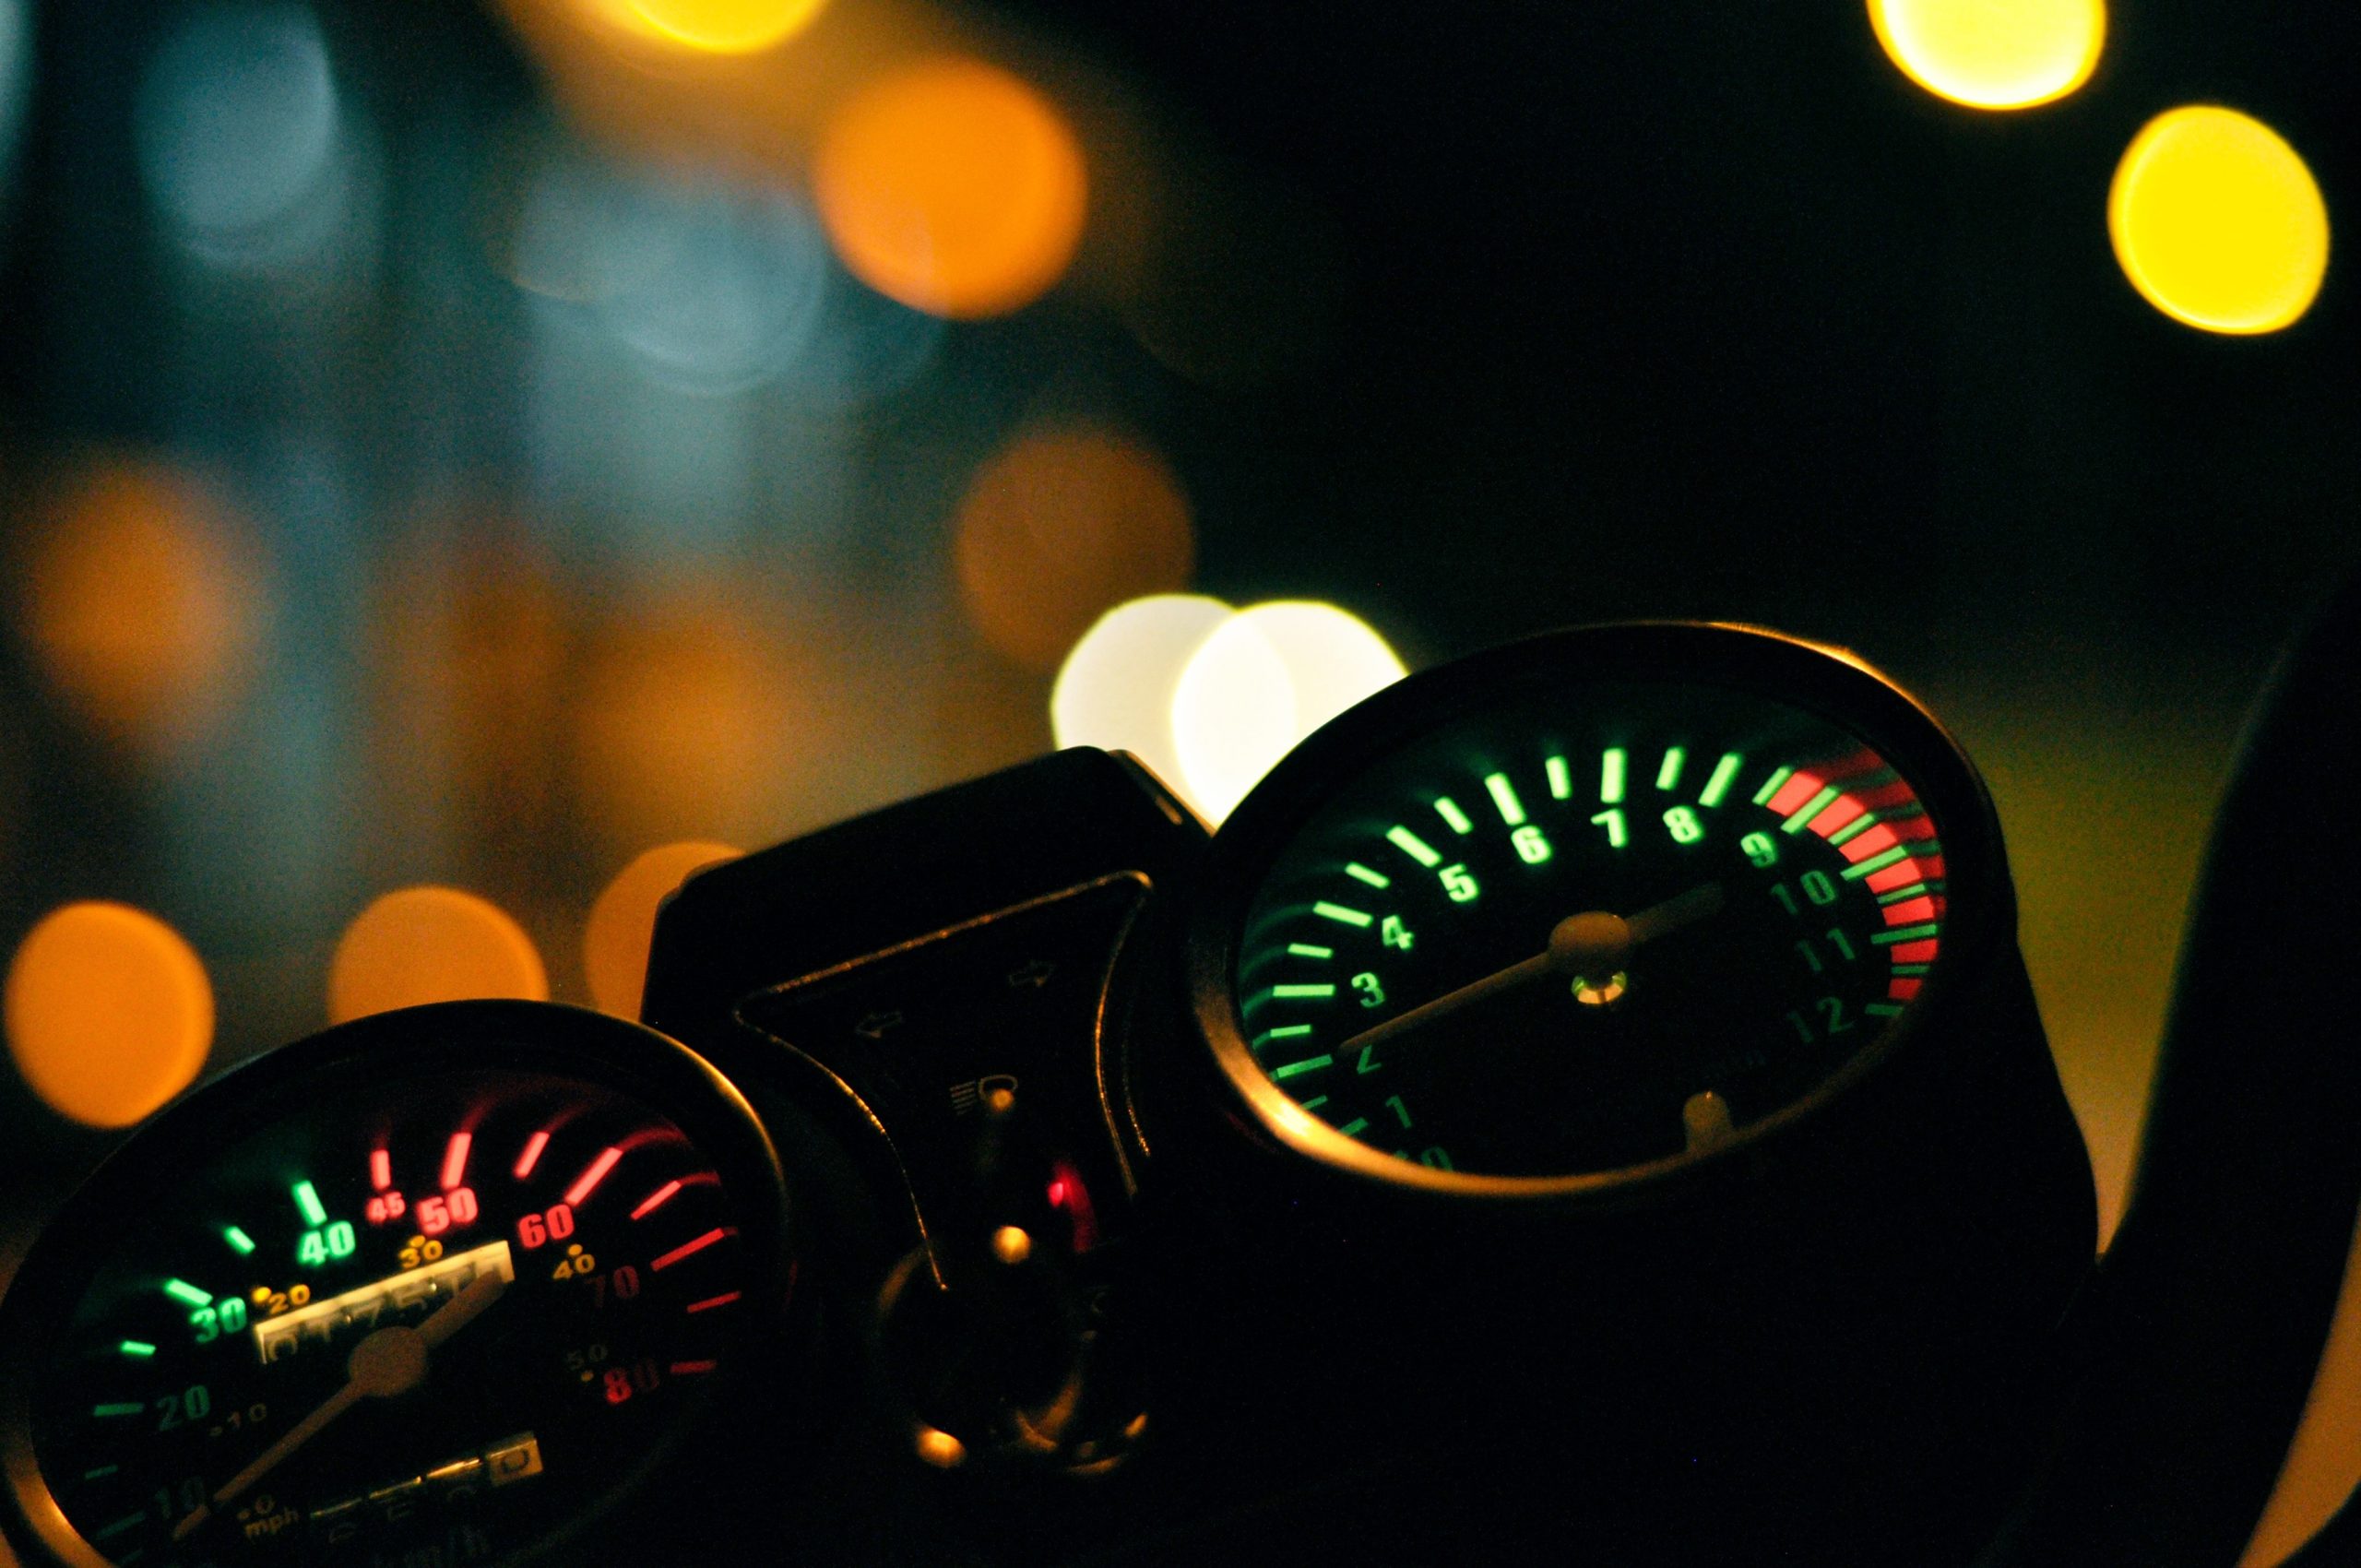 Closeup shot of the odometer of a motorcycle with blurred lights in the background at night